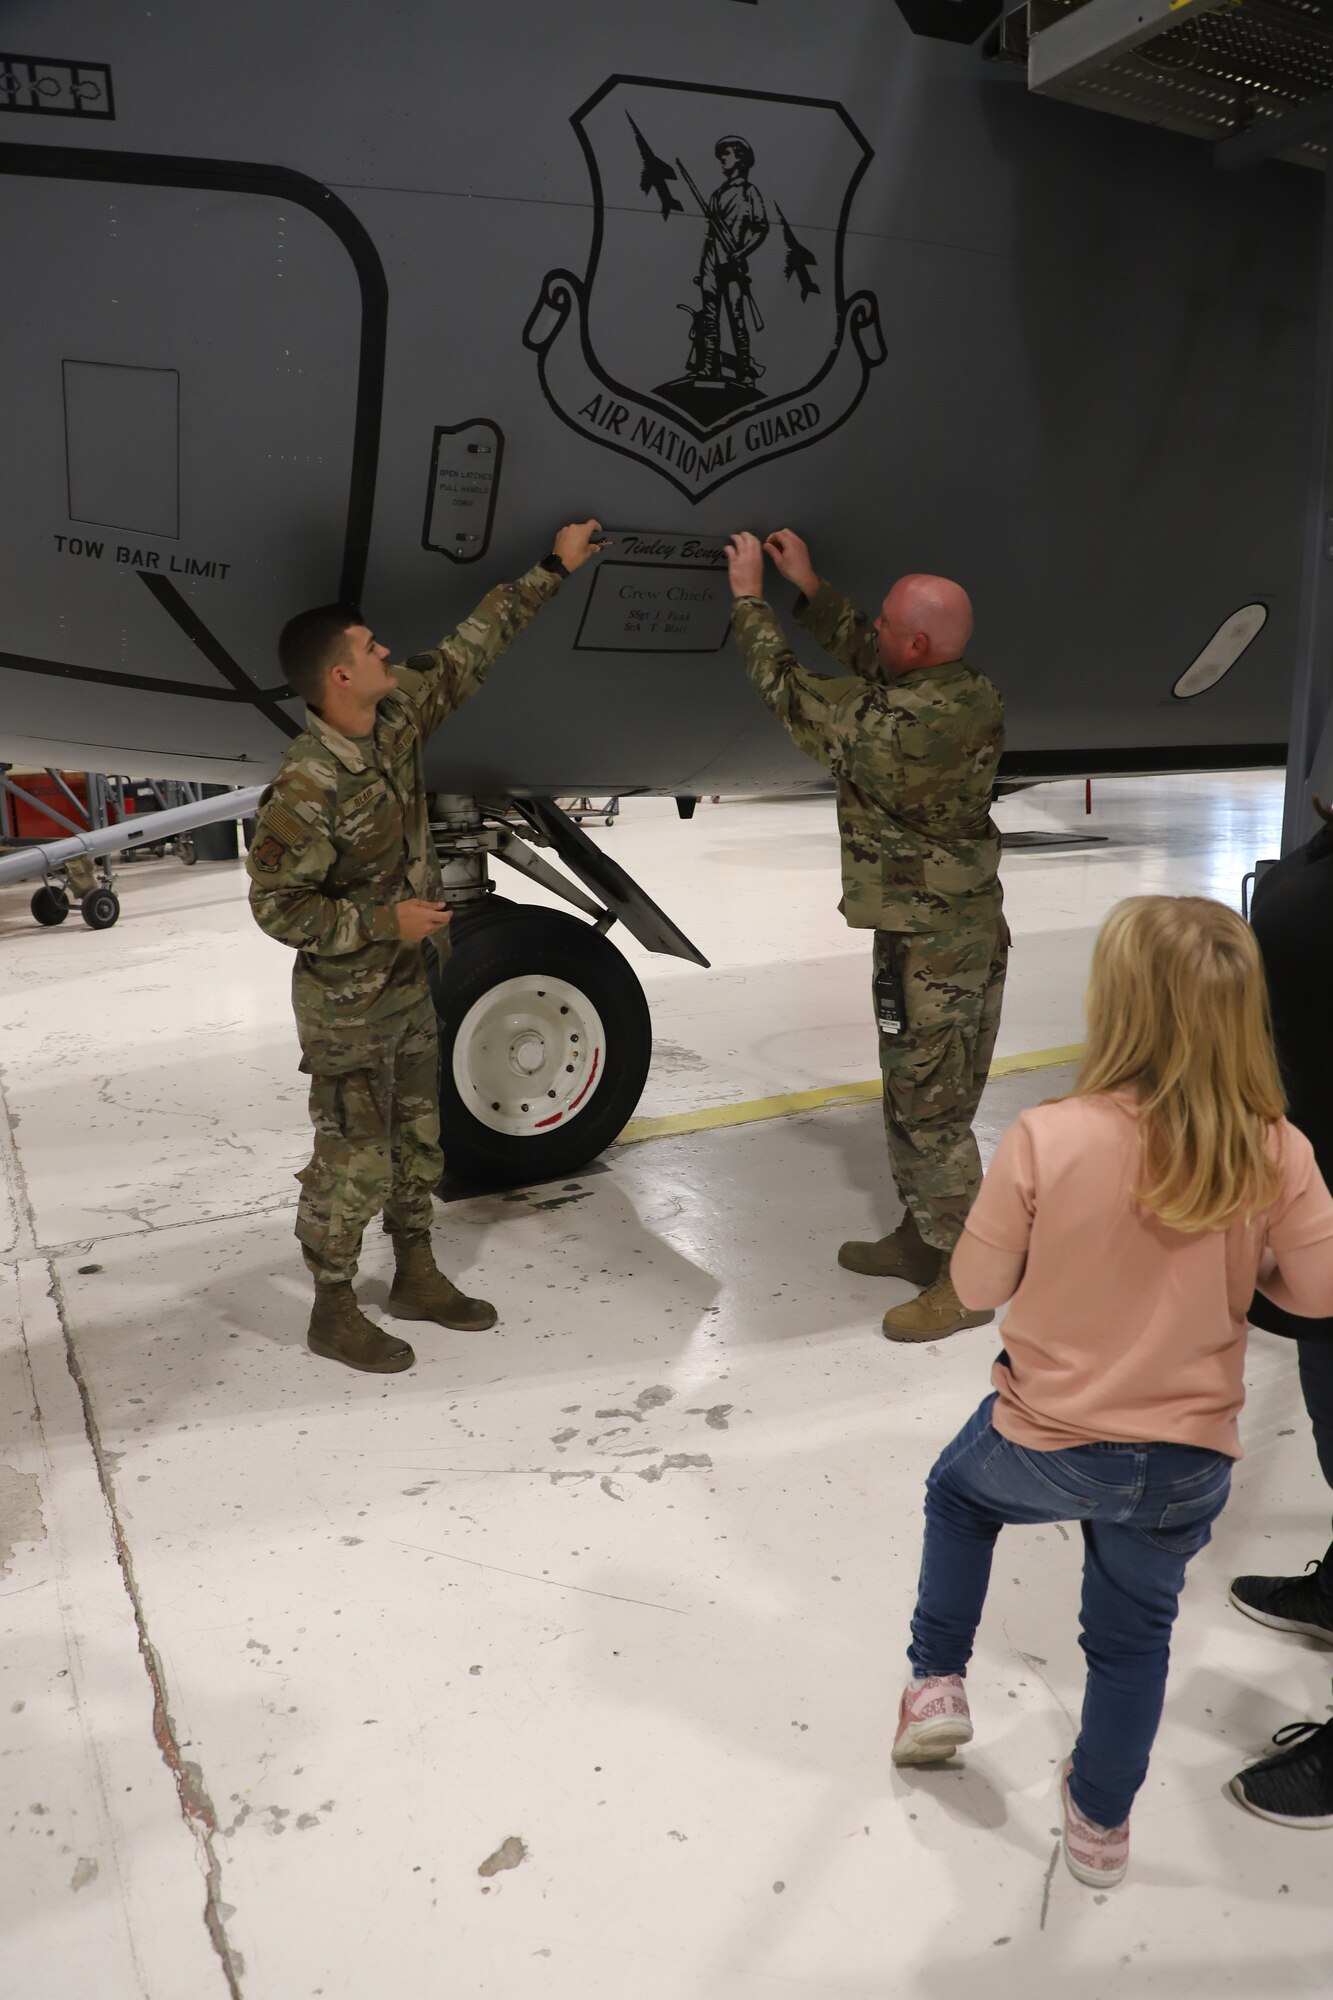 Tinley Benyshek, Pilot for the Day, receives her name plate off a KC-135 at the 190th Air Refueling Wing in Topeka, KS, October 24, 2022. Tinley is the first Pilot for a Day participant at the 190th ARW.